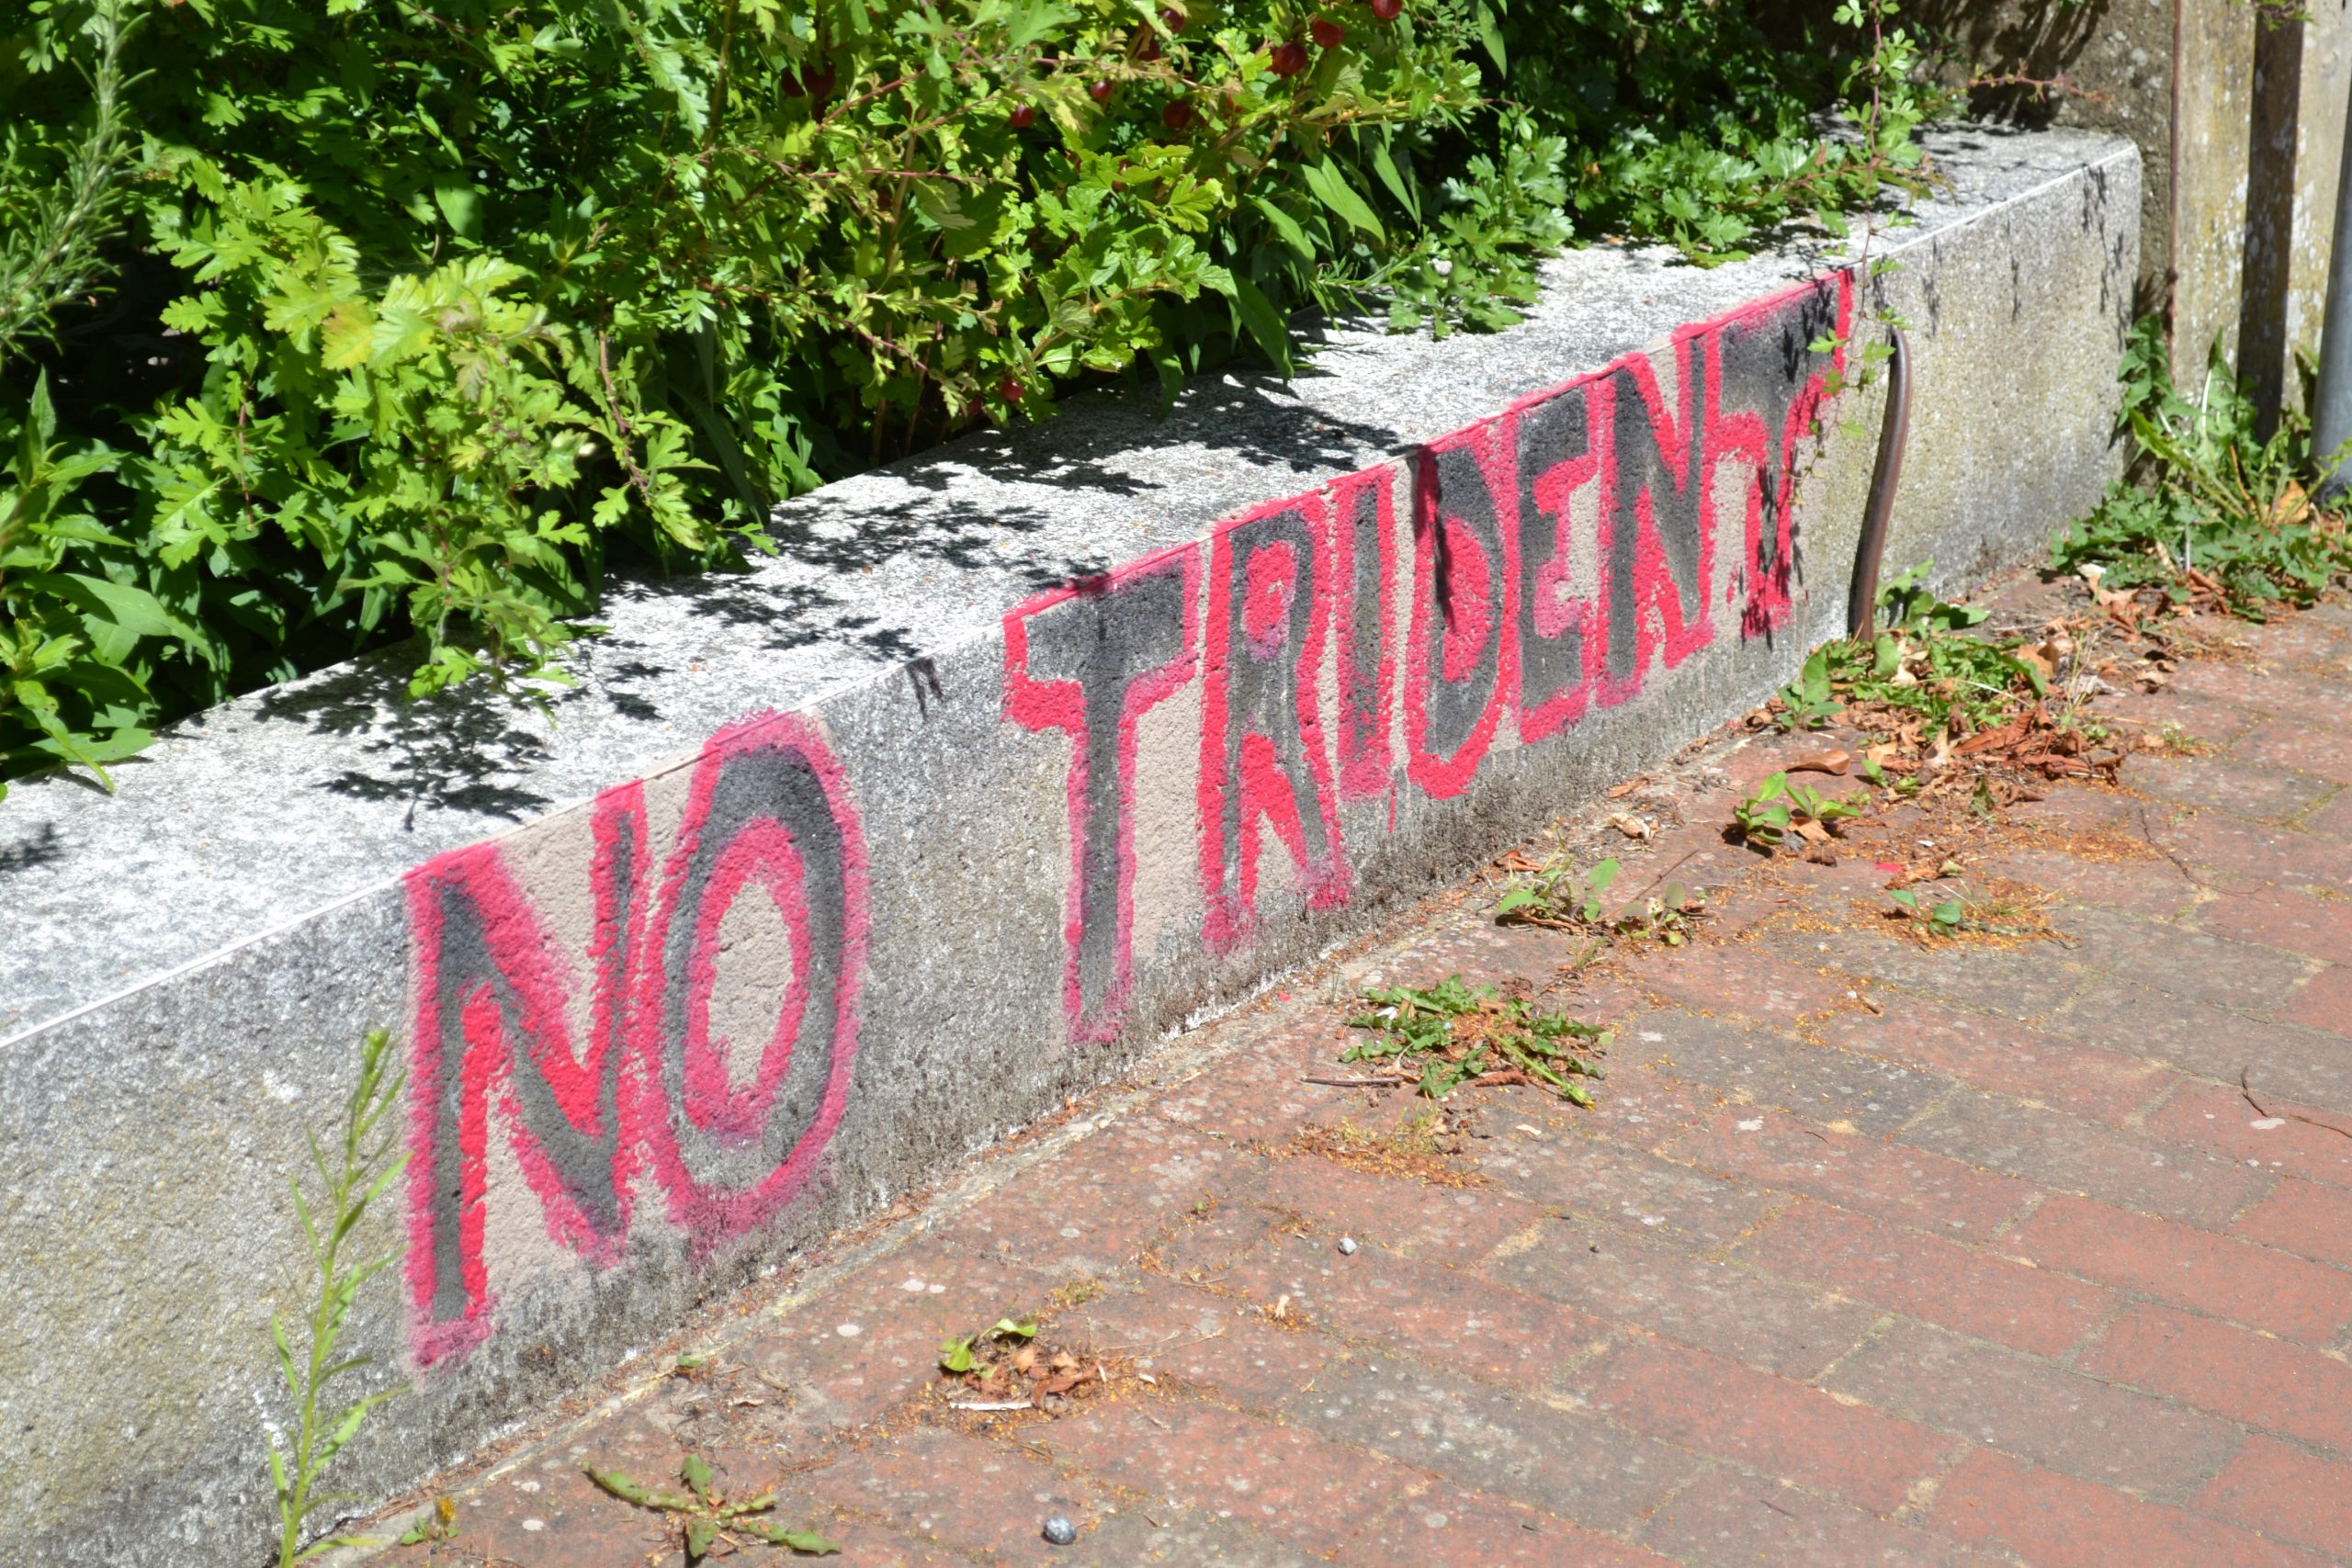 'No Trident' painted on garden wall